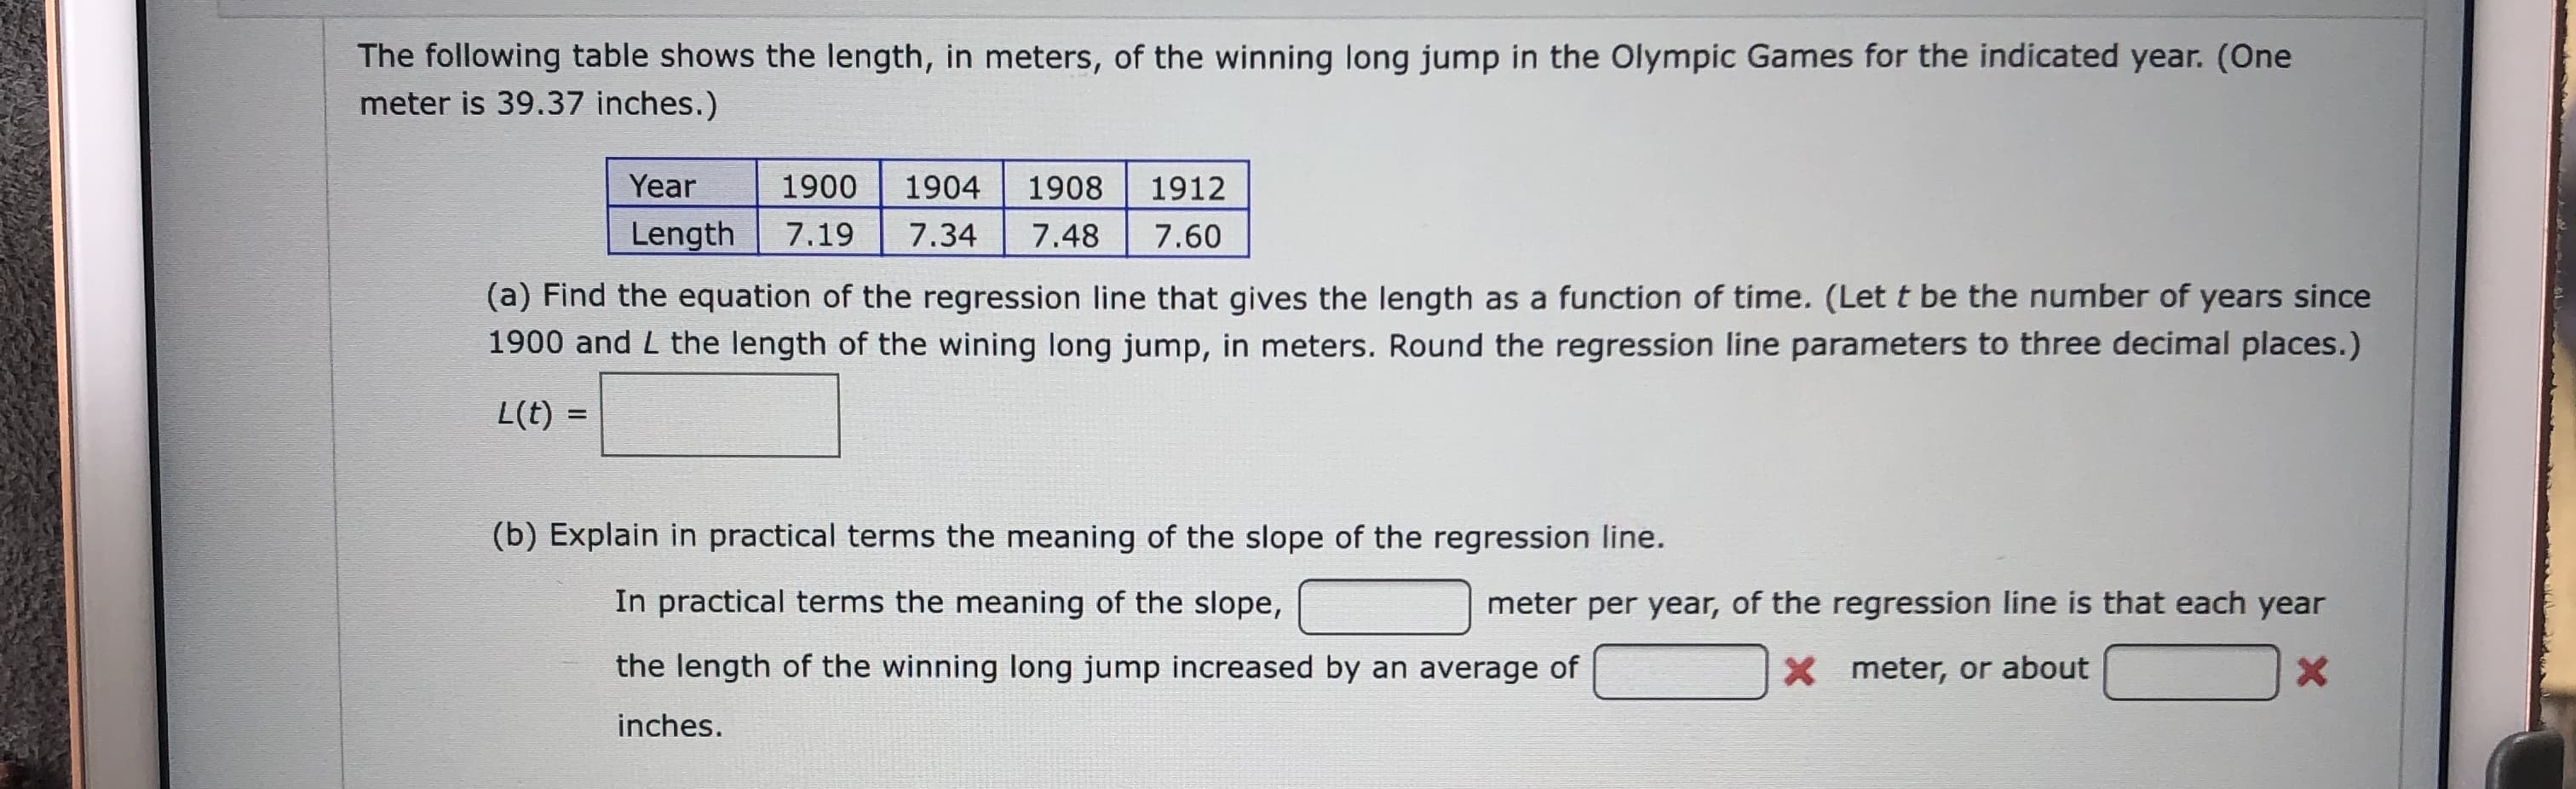 The following table shows the length, in meters, of the winning long jump in the Olympic Games for the indicated year. (One
meter is 39.37 inches.)
Year
1900
1904
1908
1912
Length
7.19
7.34
7.48
7.60
(a) Find the equation of the regression line that gives the length as a function of time. (Let t be the number of years since
1900 and L the length of the wining long jump, in meters. Round the regression line parameters to three decimal places.)
L(t) =
(b) Explain in practical terms the meaning of the slope of the regression line.
In practical terms the meaning of the slope,
meter per year, of the regression line is that each year
the length of the winning long jump increased by an average of
X meter, or about
inches.
